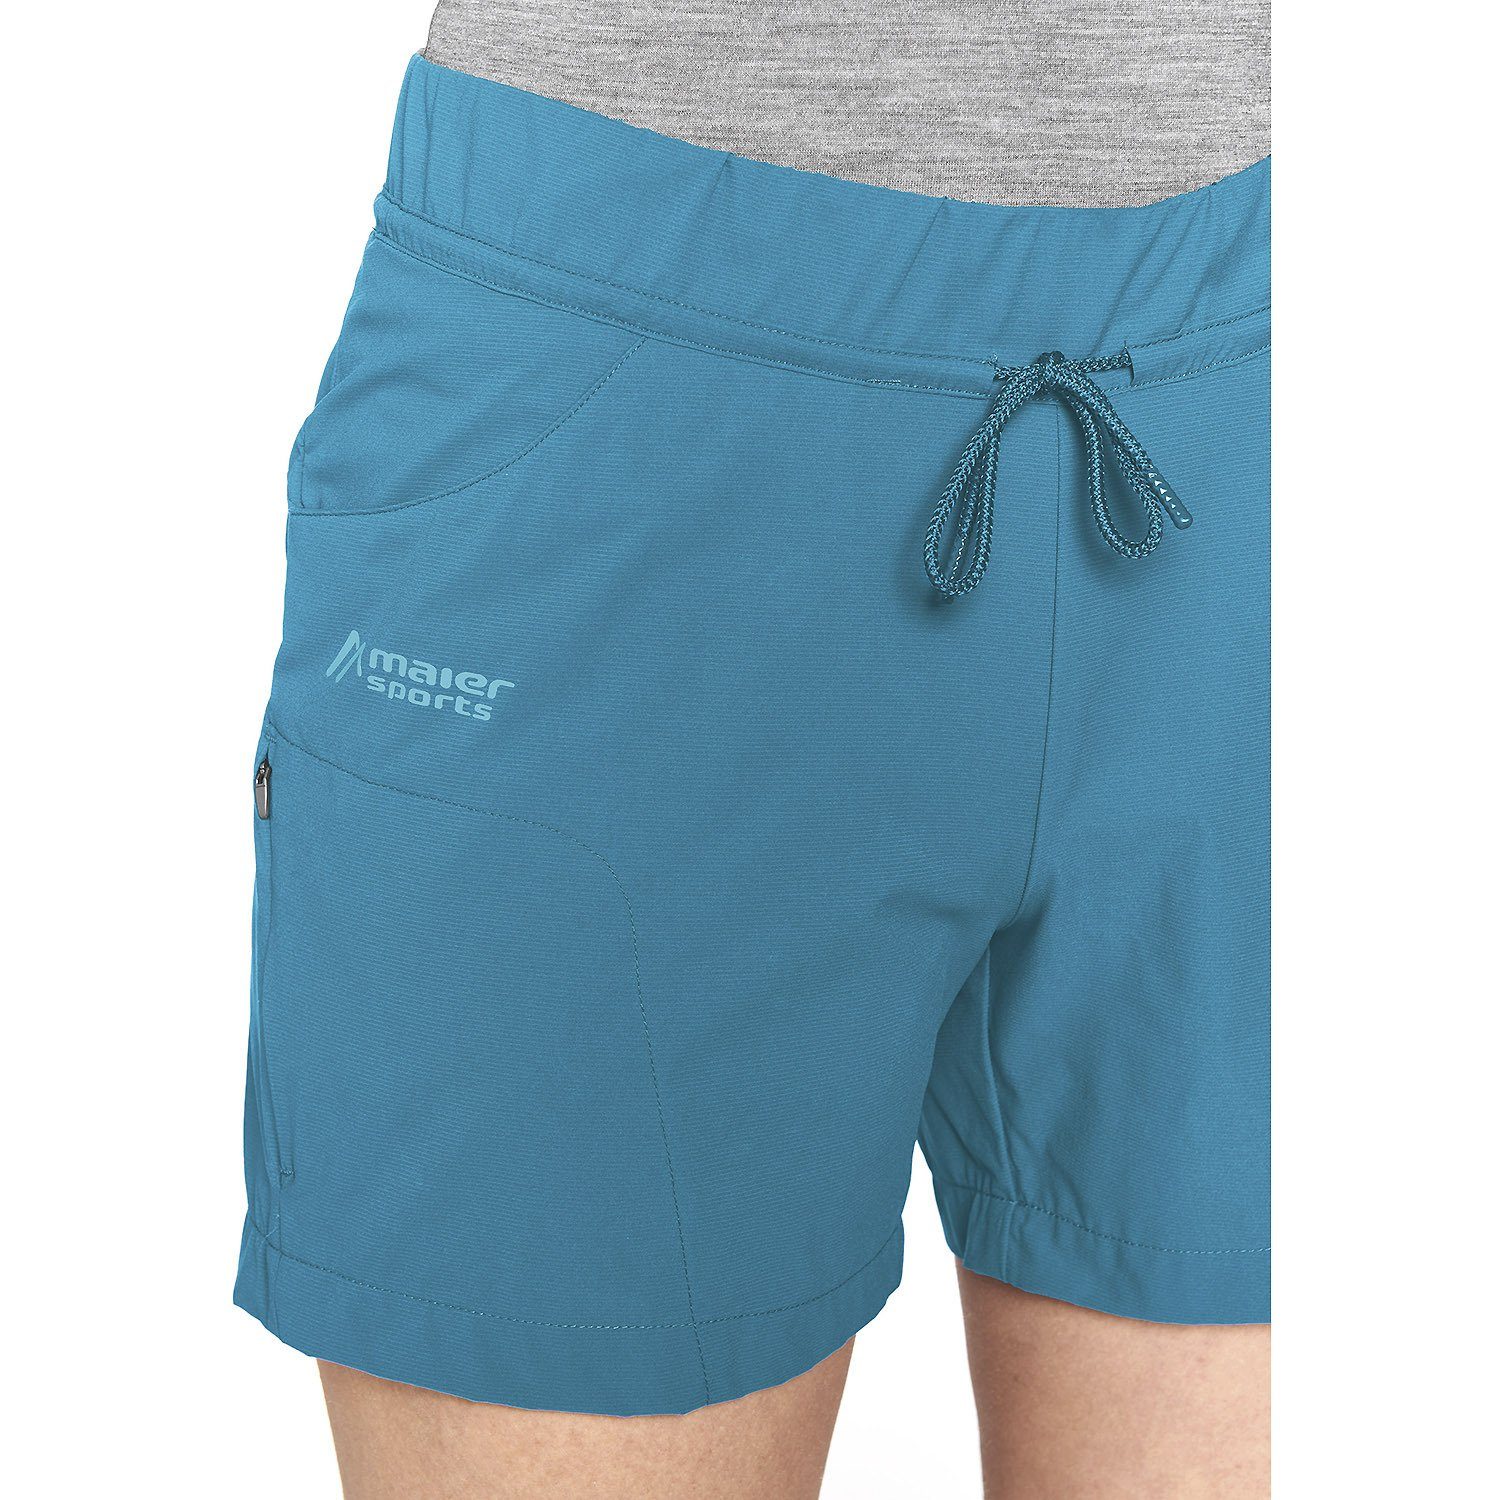 Petrol Shorts Maier Sports Fortunit Funktionsshorts